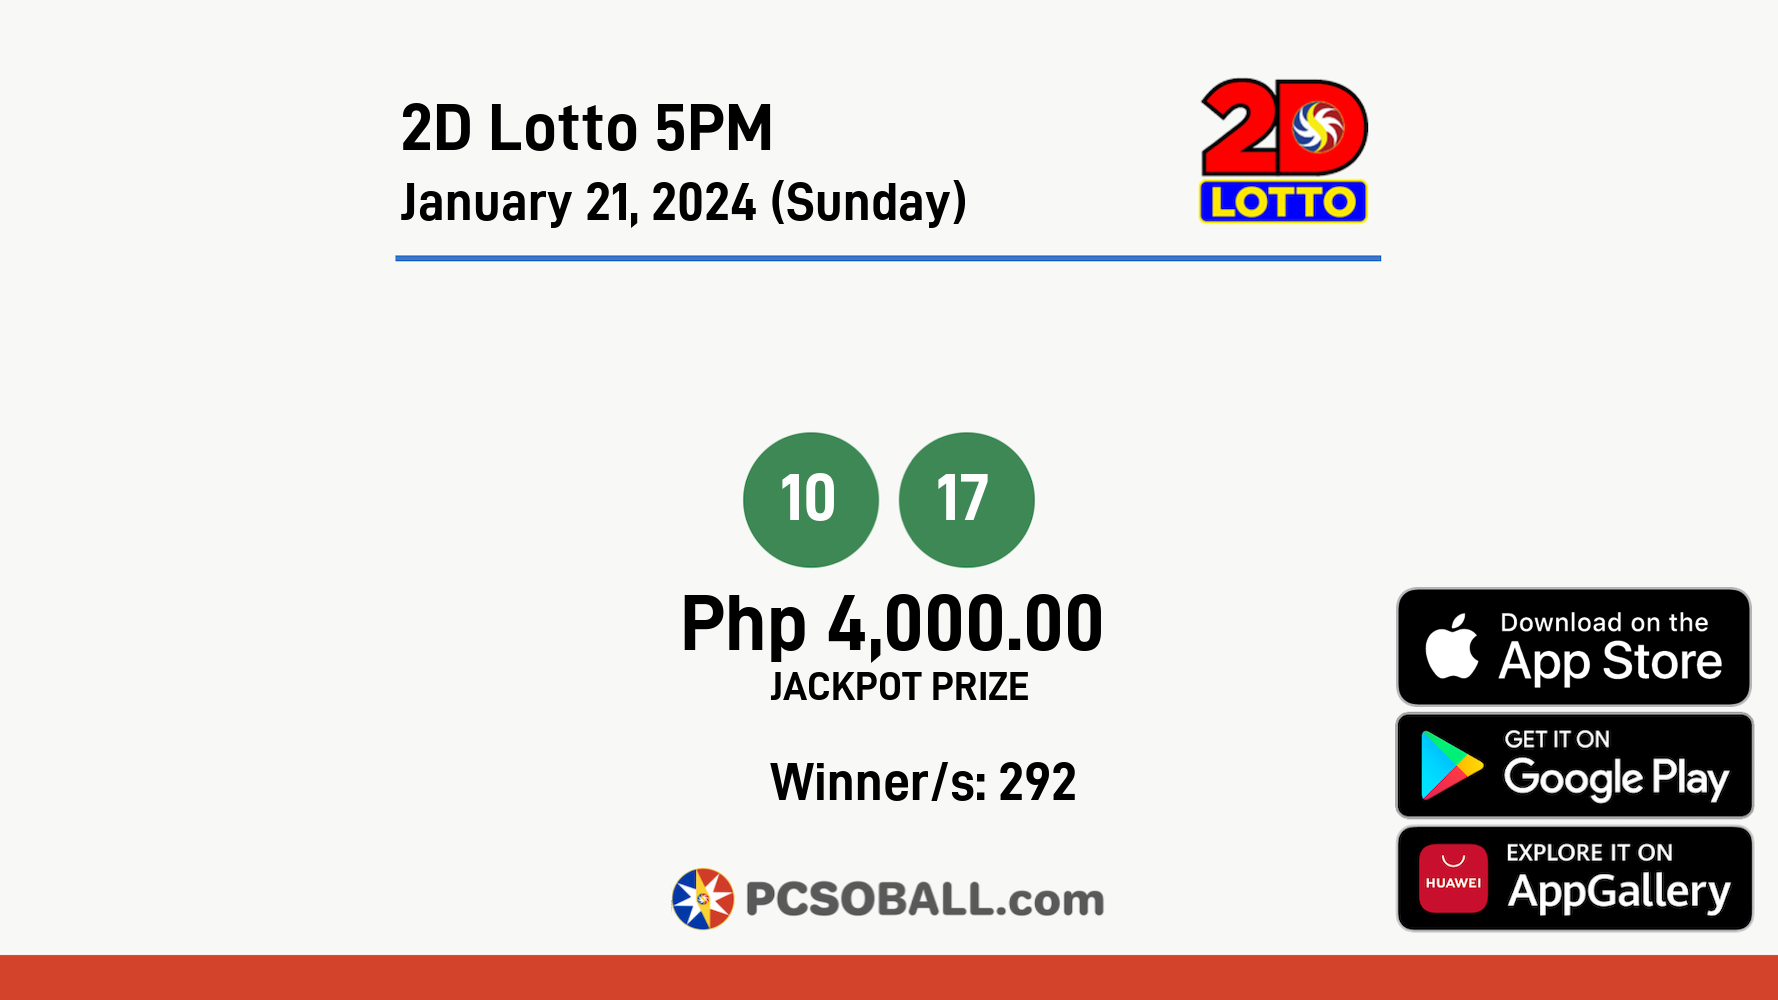 2D Lotto 5PM January 21, 2024 (Sunday) Result